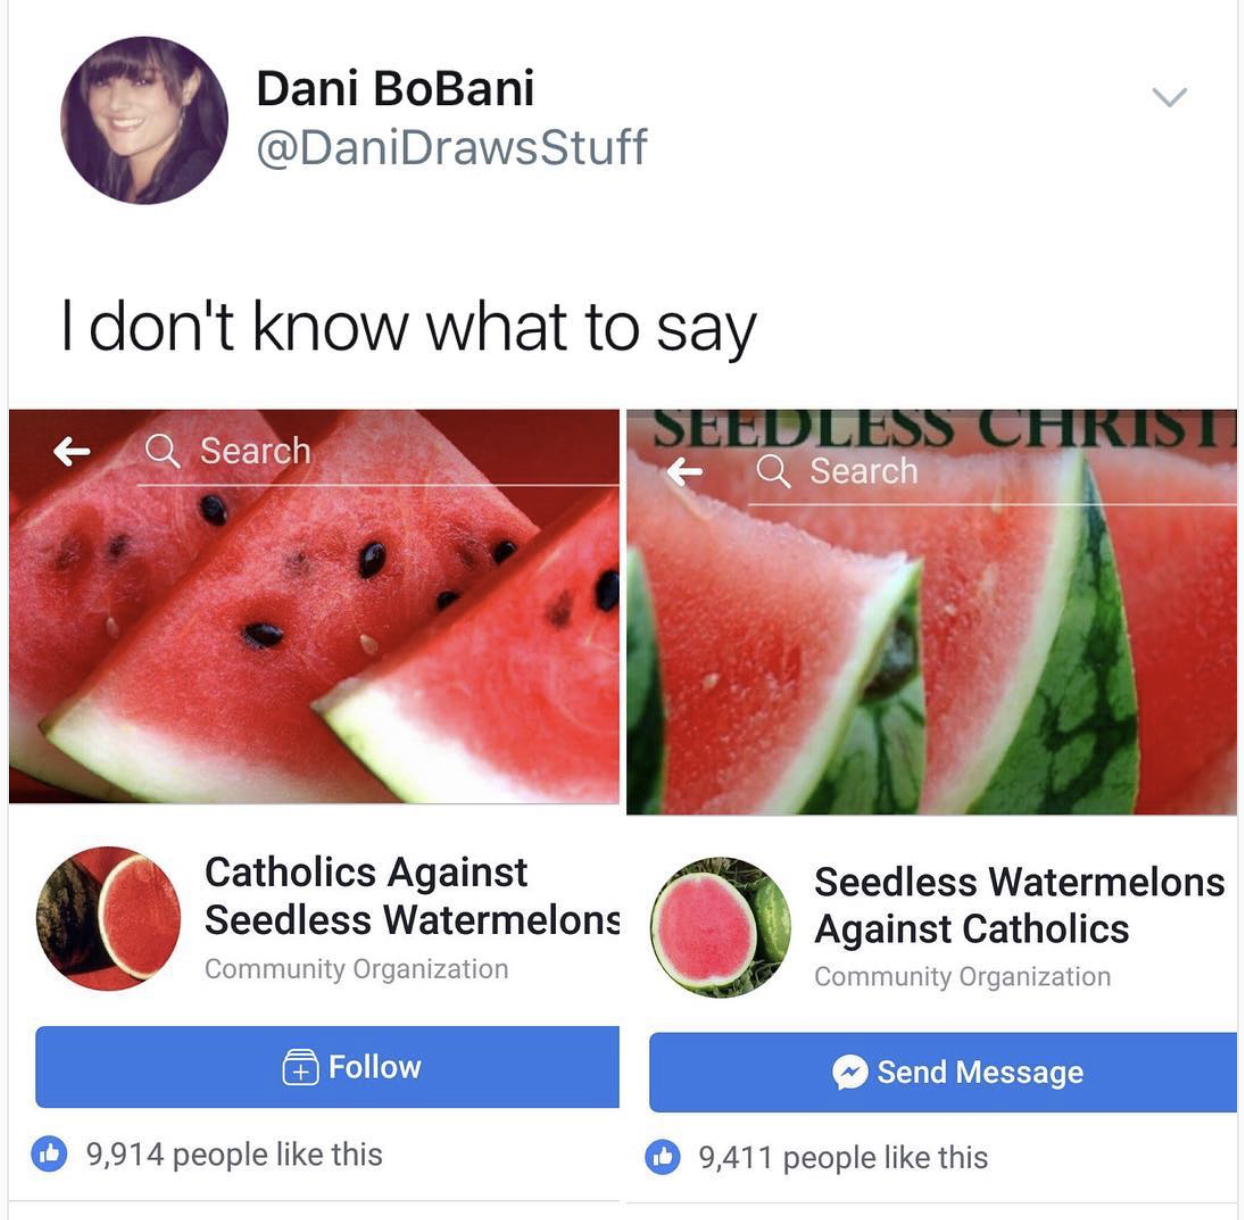 seedless watermelons against christians - Dani BoBani Stuff I don't know what to say Q Search Seedless Christ Q Search Catholics Against Seedless Watermelons Community Organization Seedless Watermelons Against Catholics Community Organization Send Message